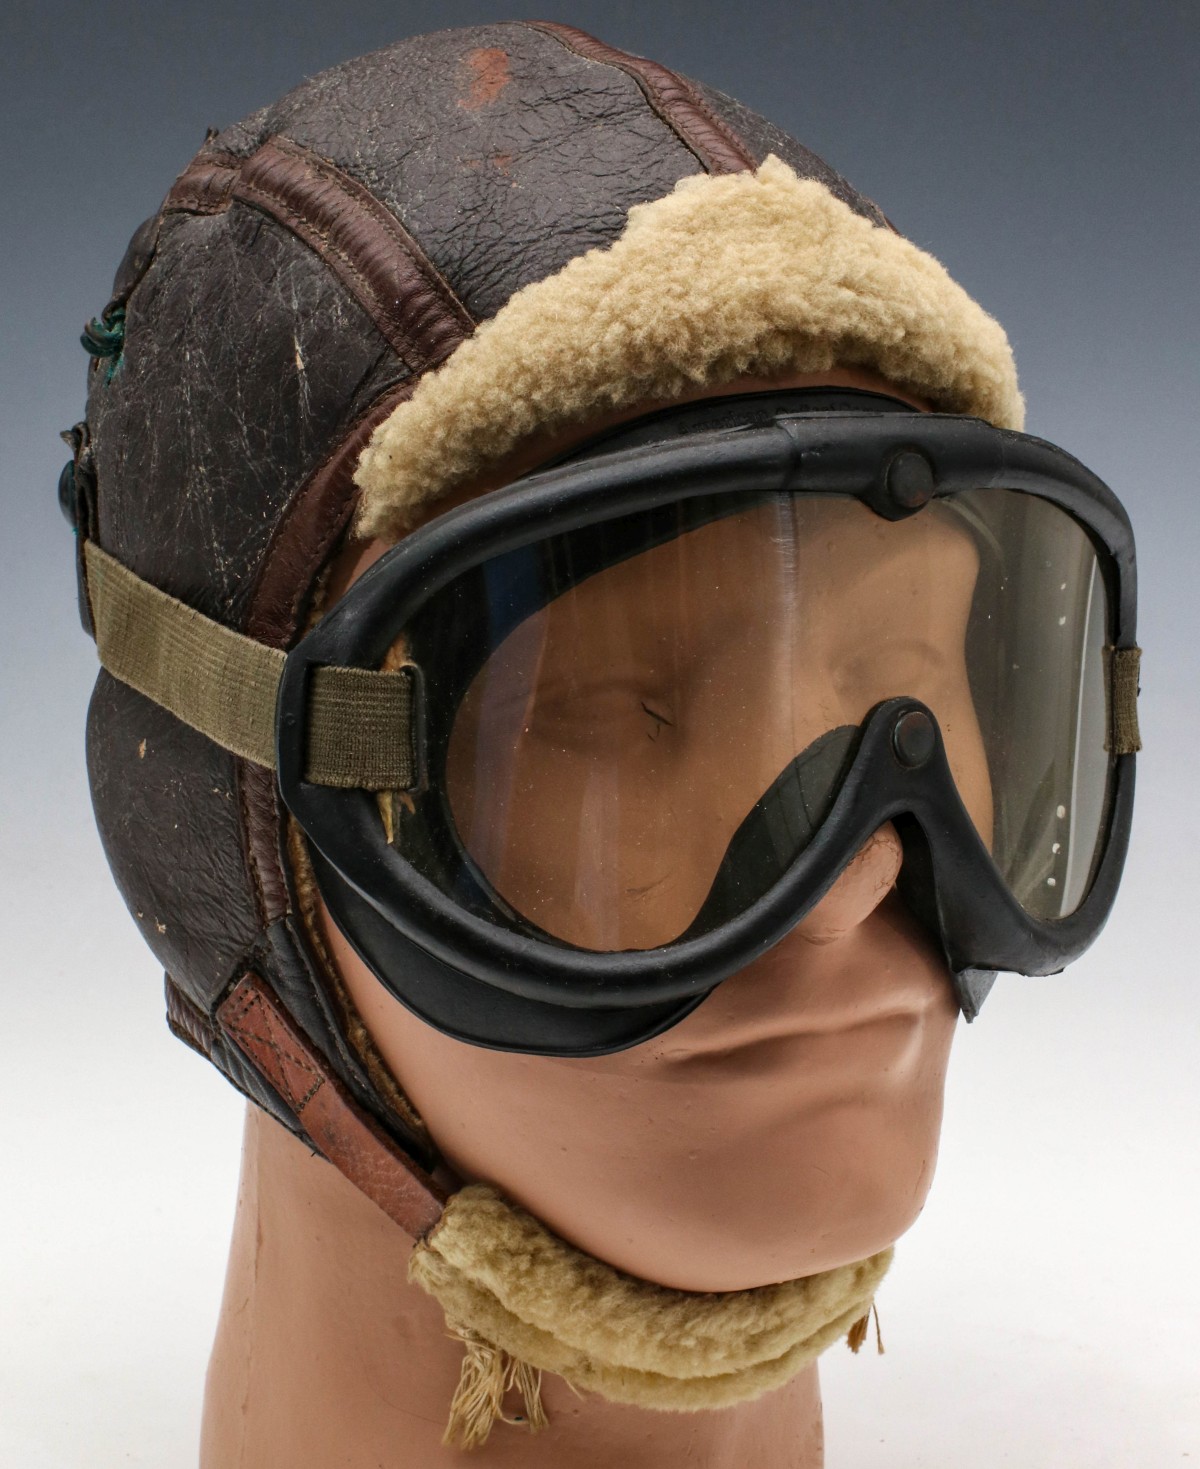 A USAAF B-6 LEATHER FLIGHT HELMET WITH GOGGLES